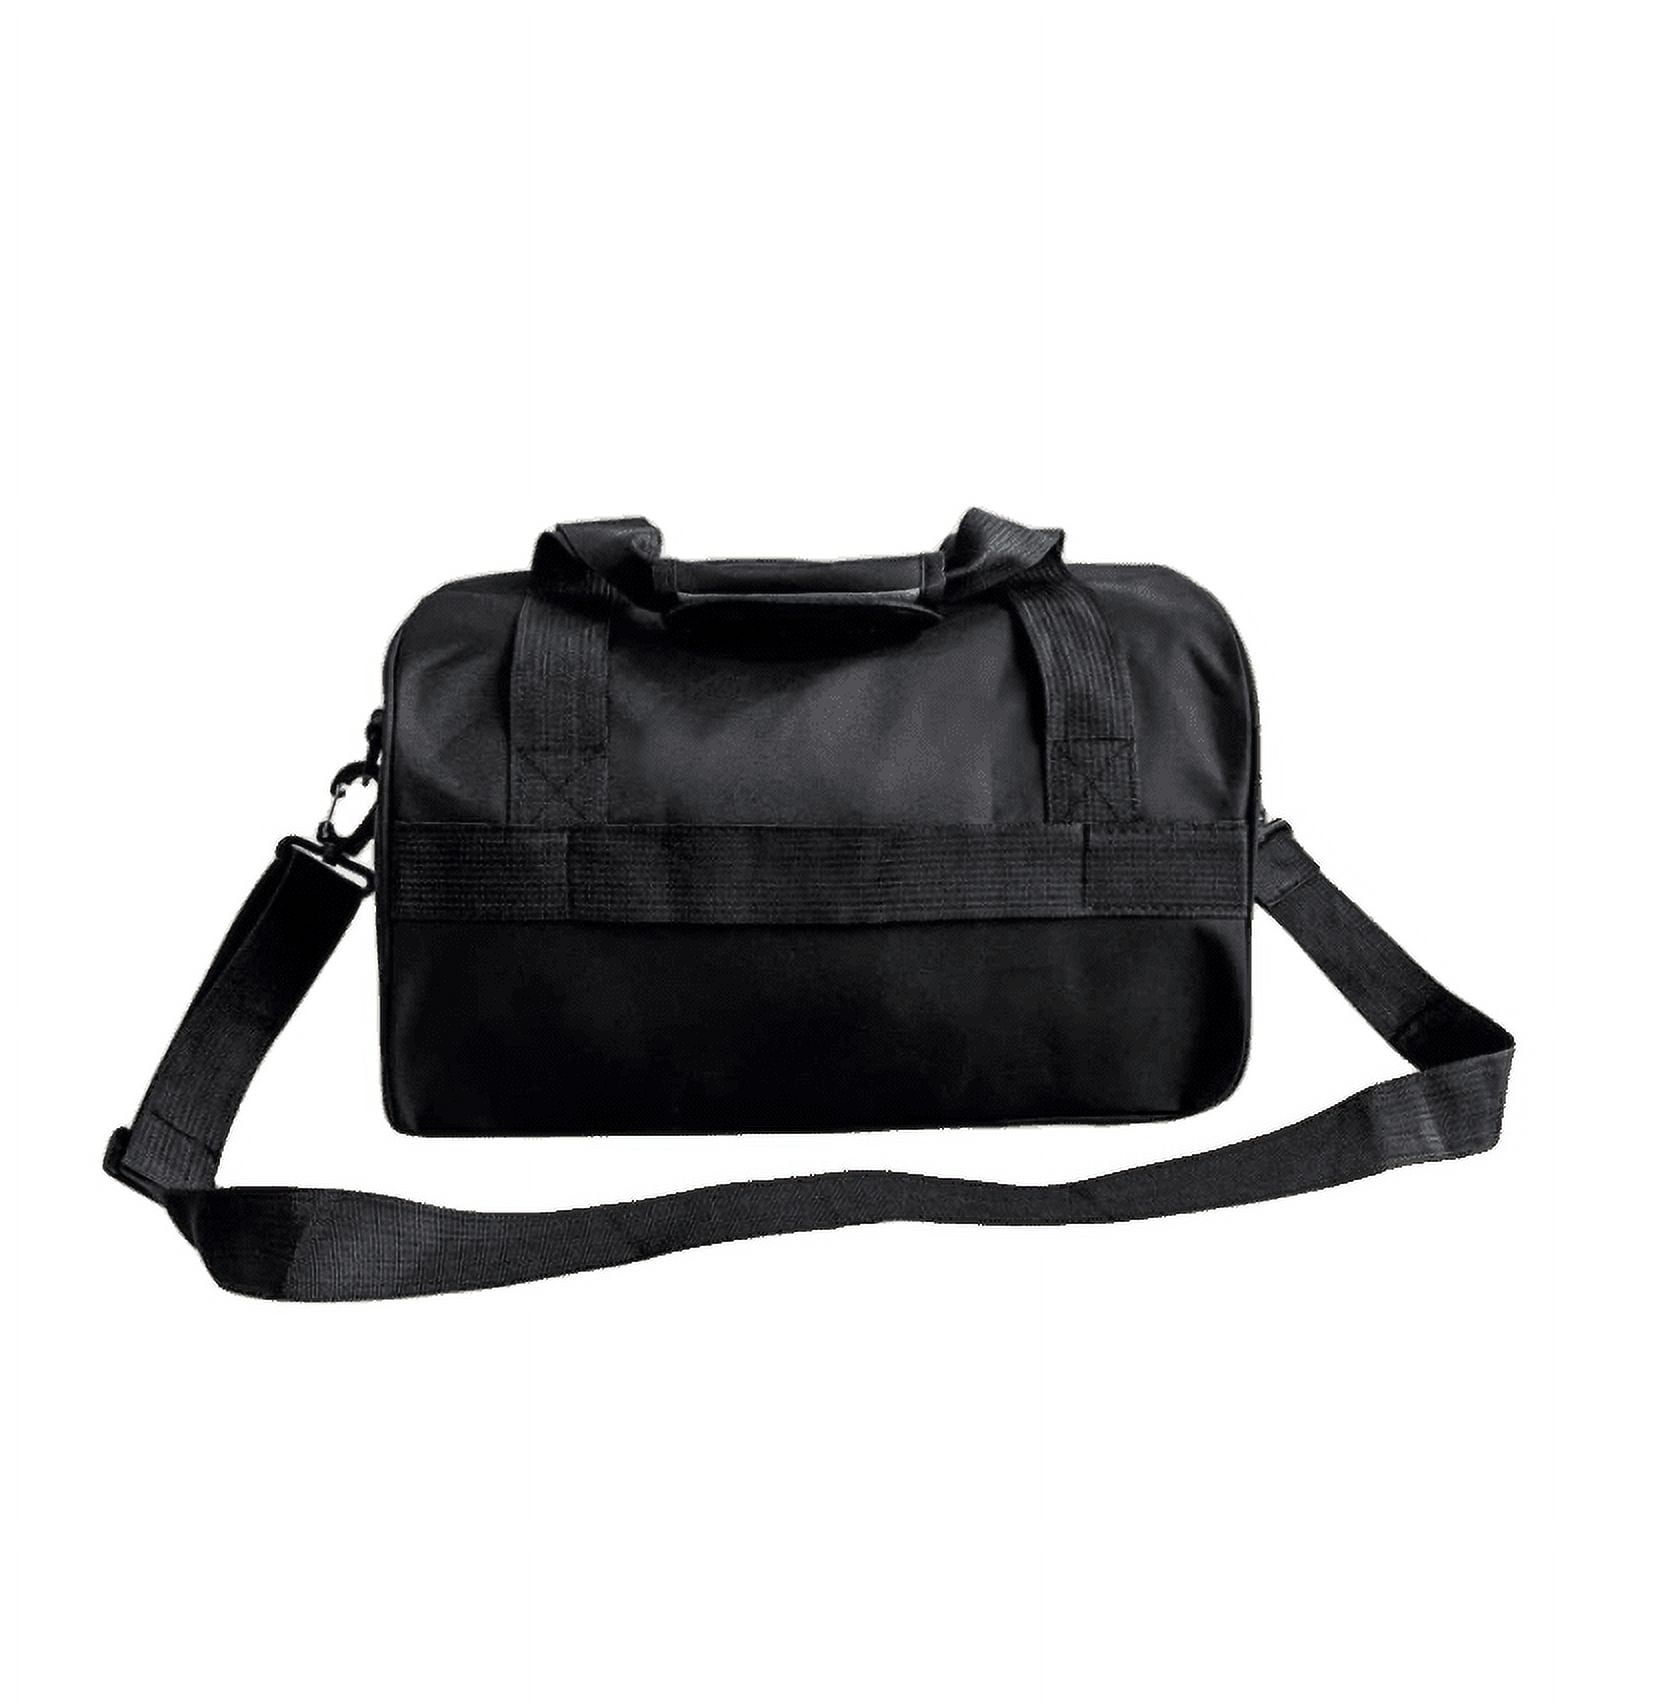 Gym Bag for Men Women, Small Fitness Workout Sports Duffle Bag